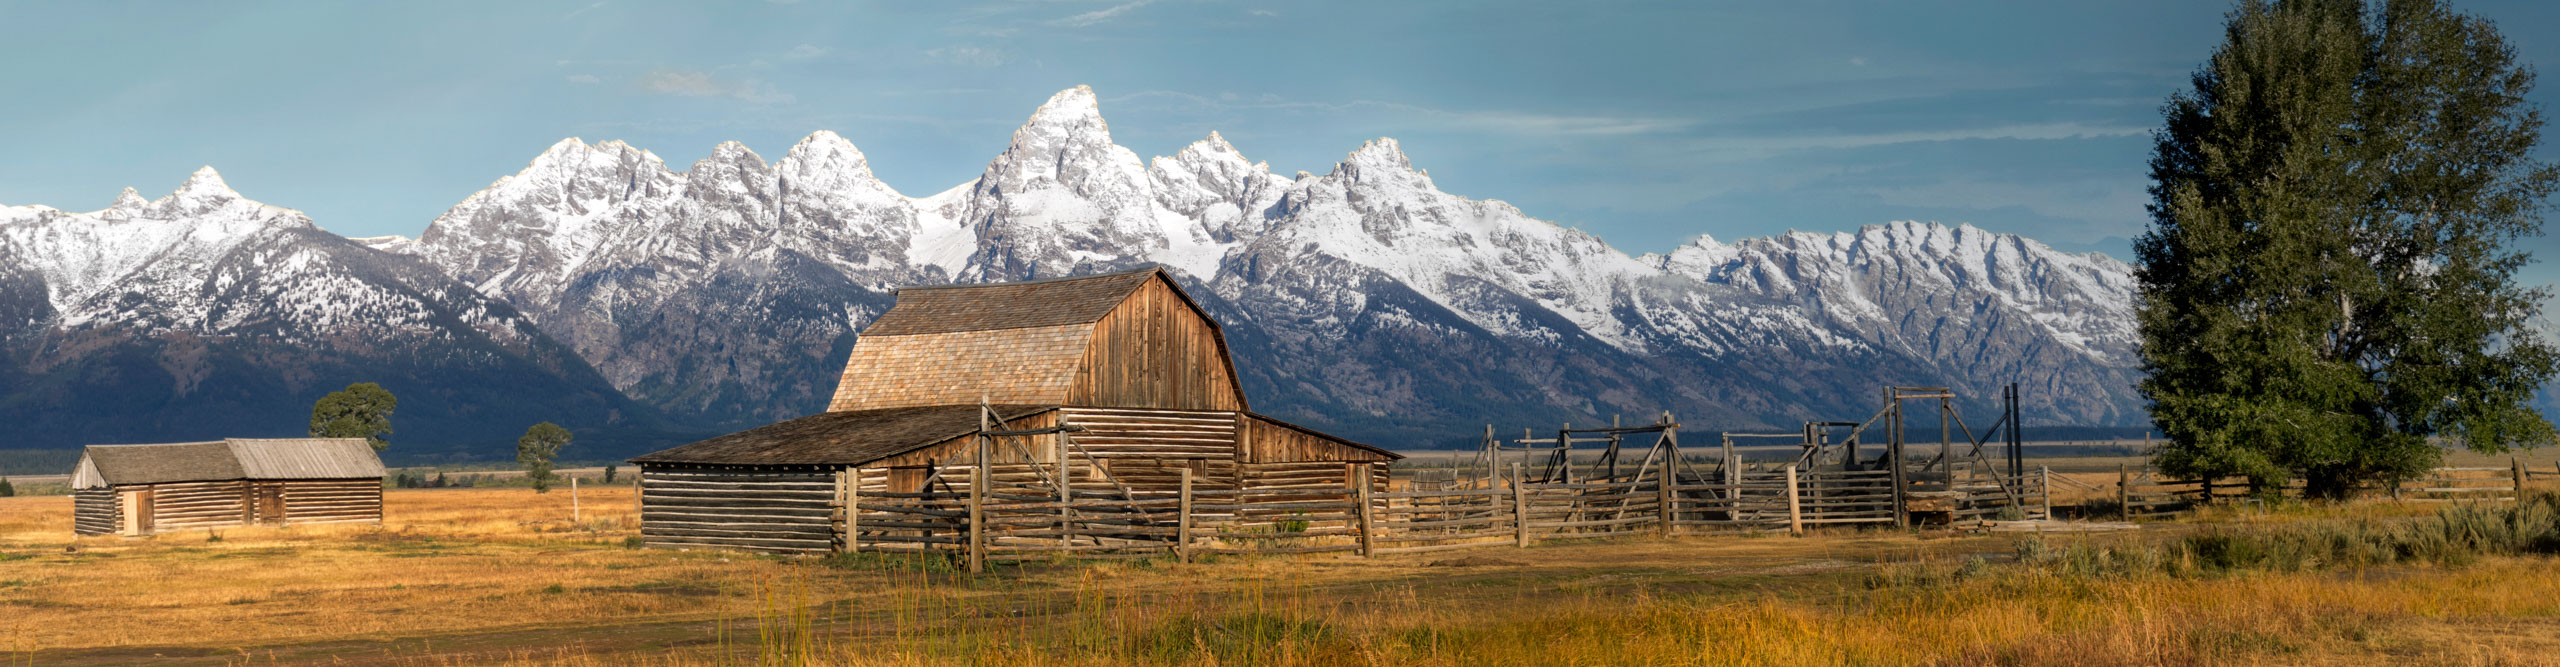 Dramatic landscape with mountains and Moulton barn, Mormon Row, Grand Teton National Park, Wyoming